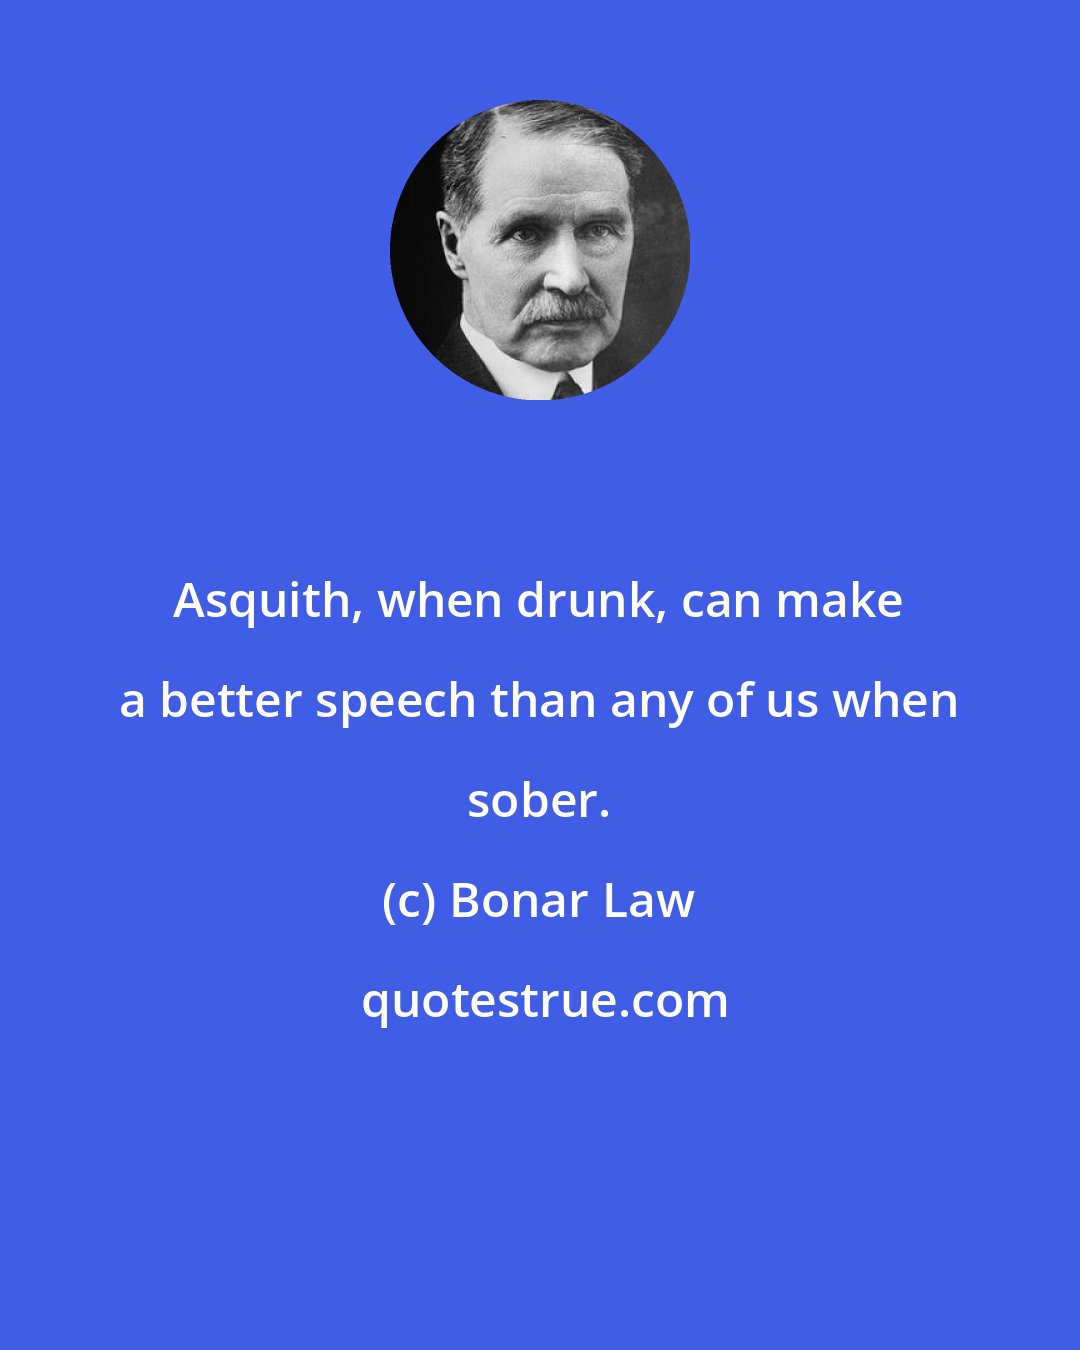 Bonar Law: Asquith, when drunk, can make a better speech than any of us when sober.